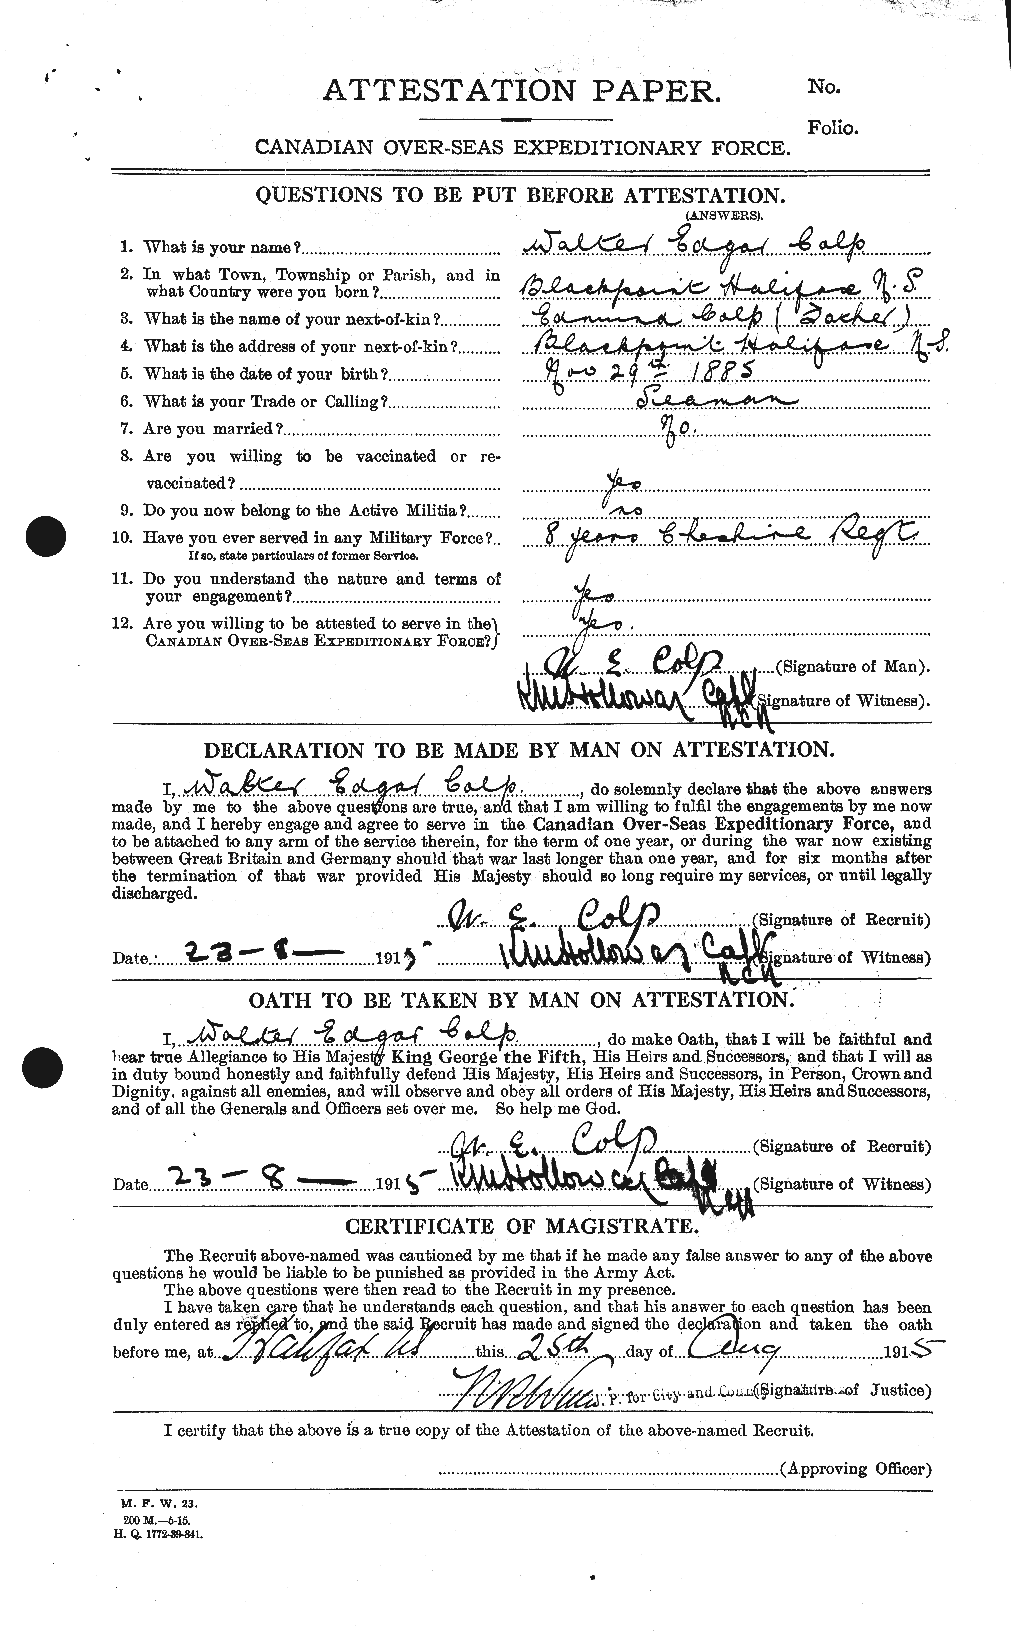 Personnel Records of the First World War - CEF 067445a